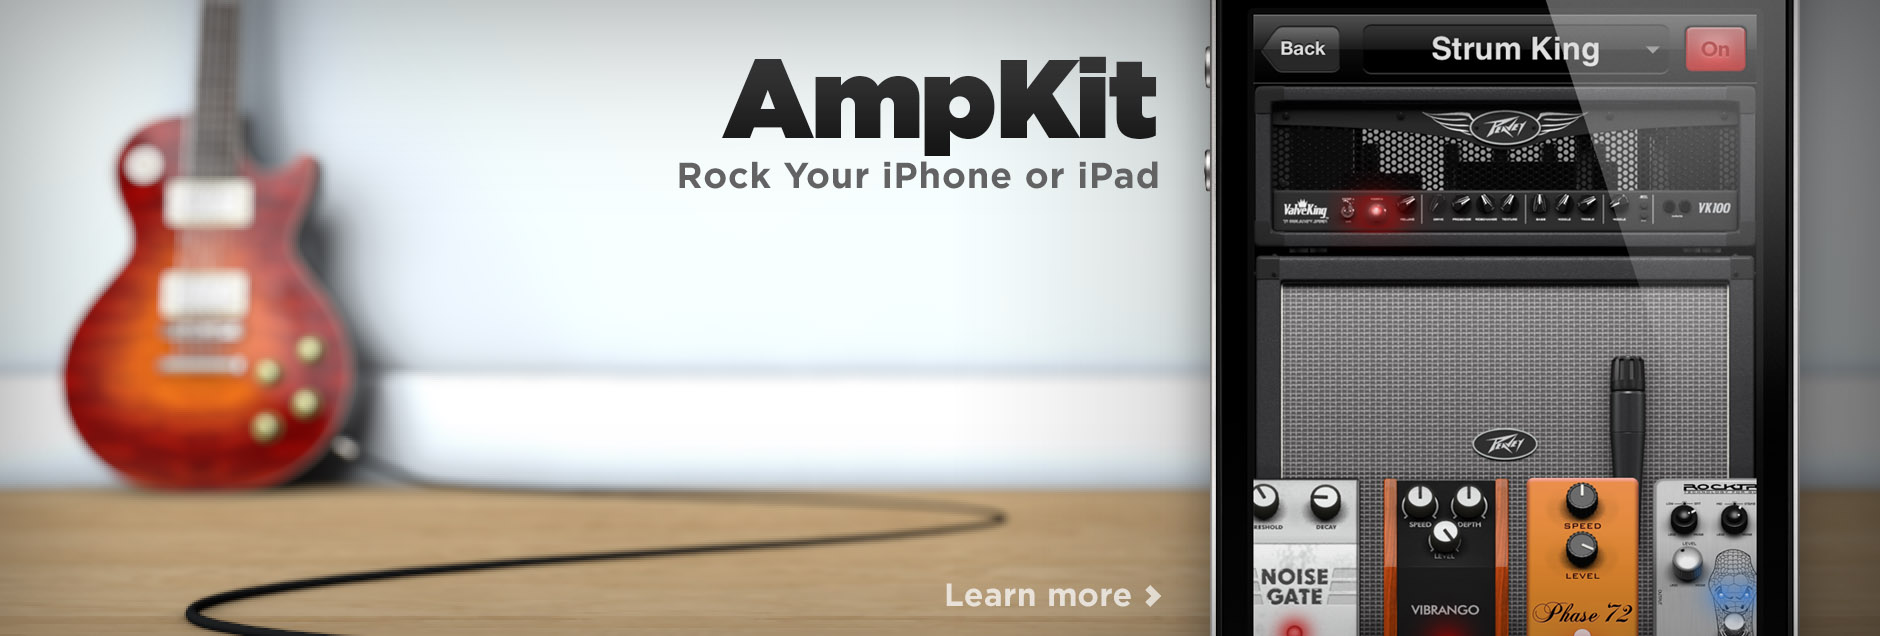 AmpKit - Rock your iPad, iPhone or iPod touch